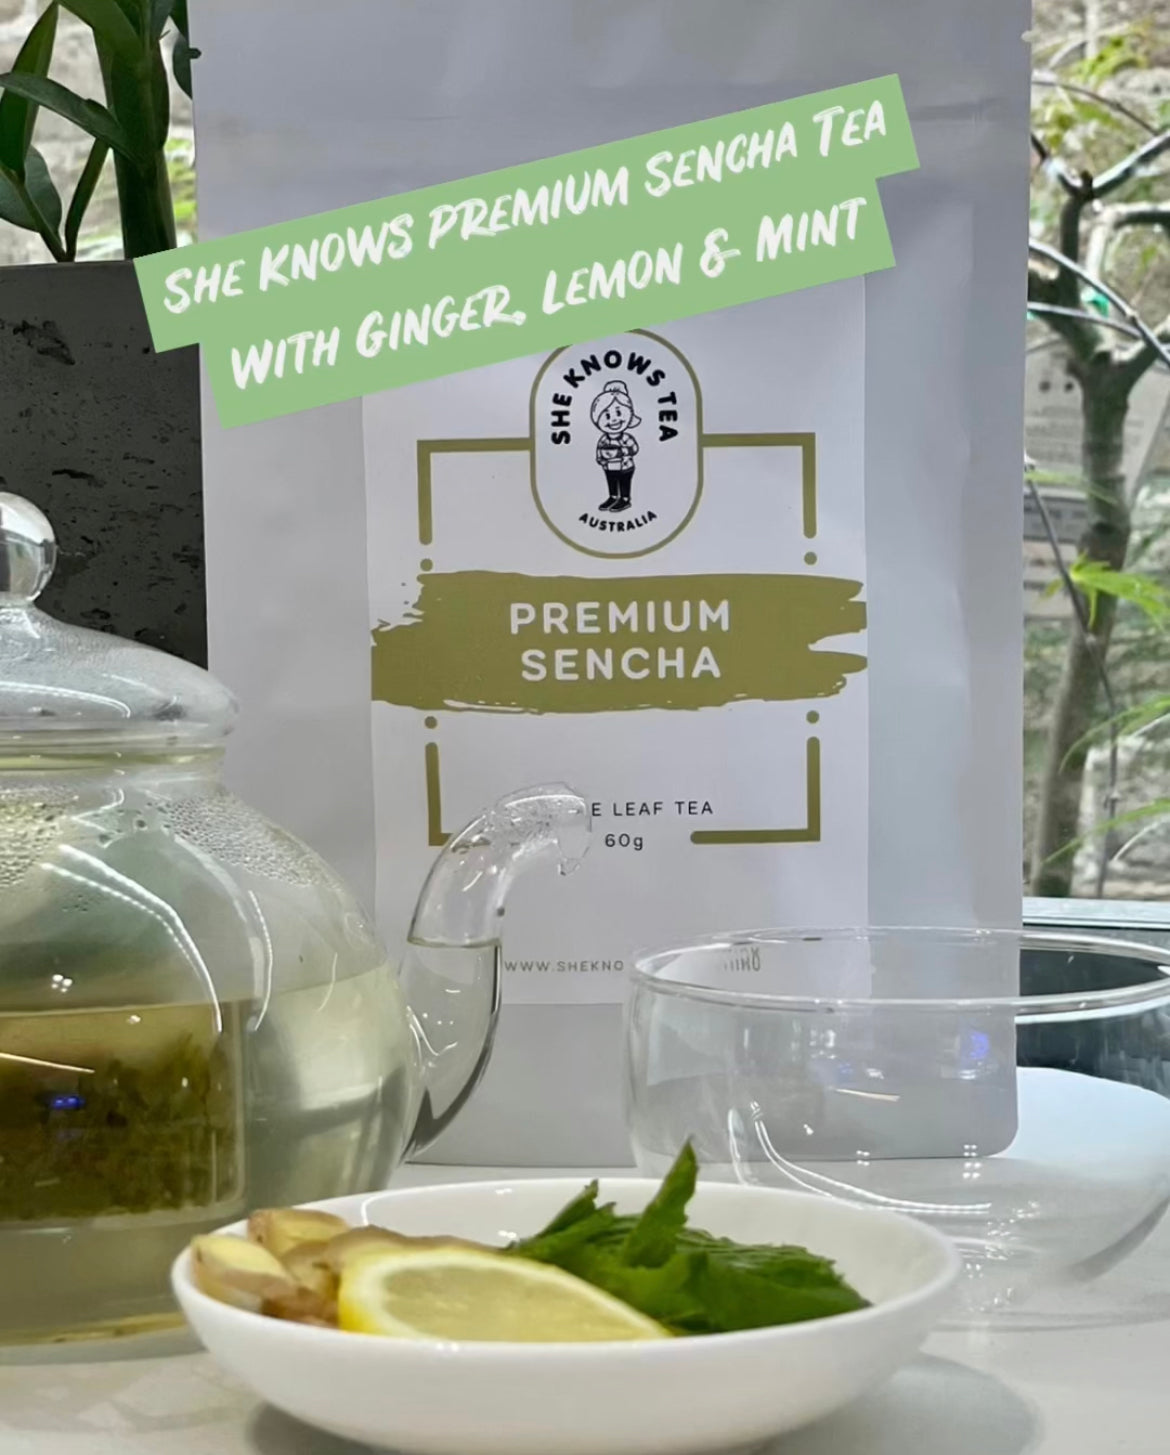 Lets Get Infusing with She Knows Premium Sencha Tea!